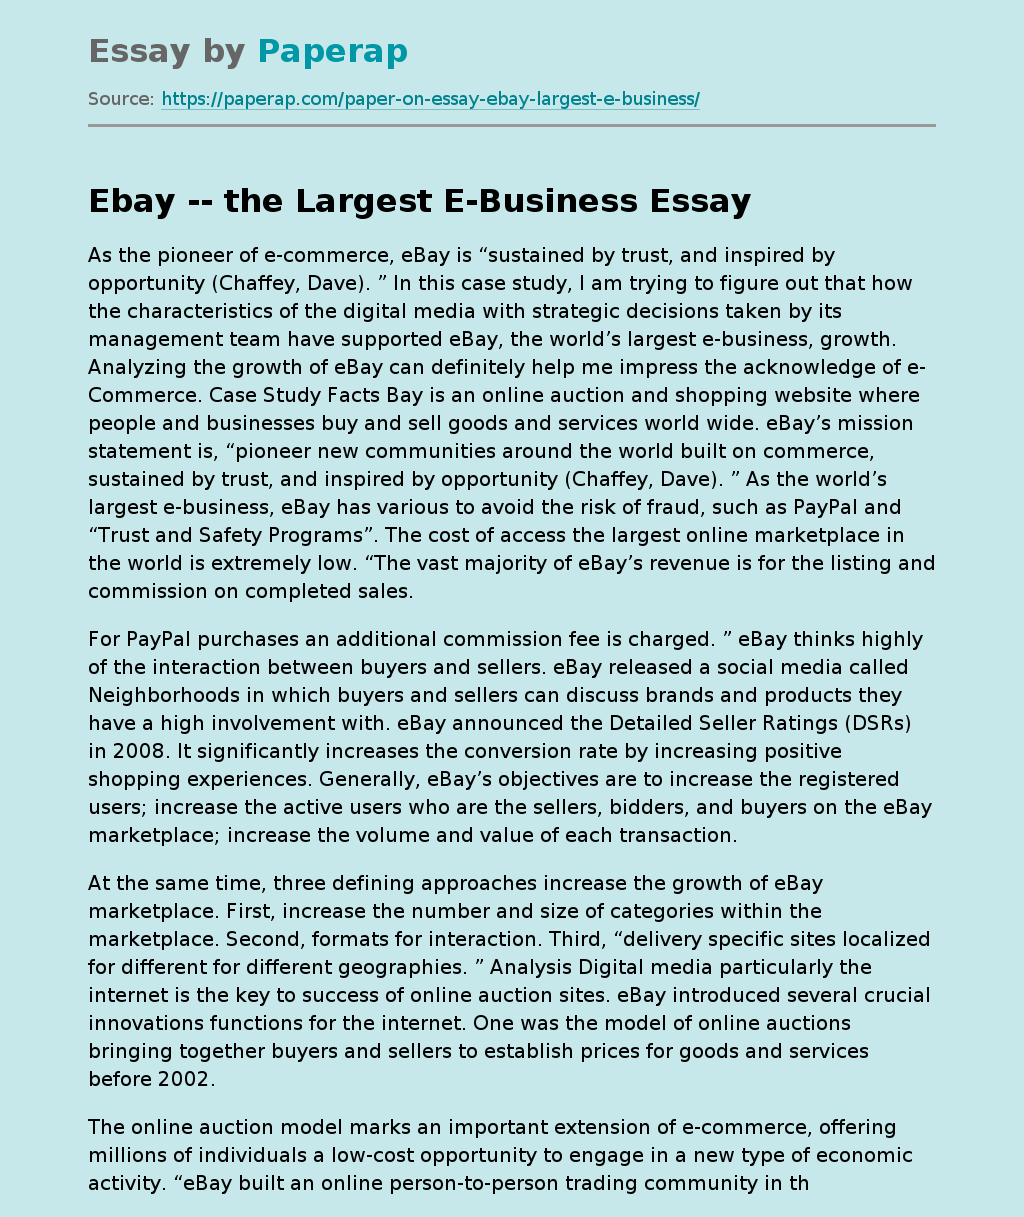 Ebay -- the Largest E-Business